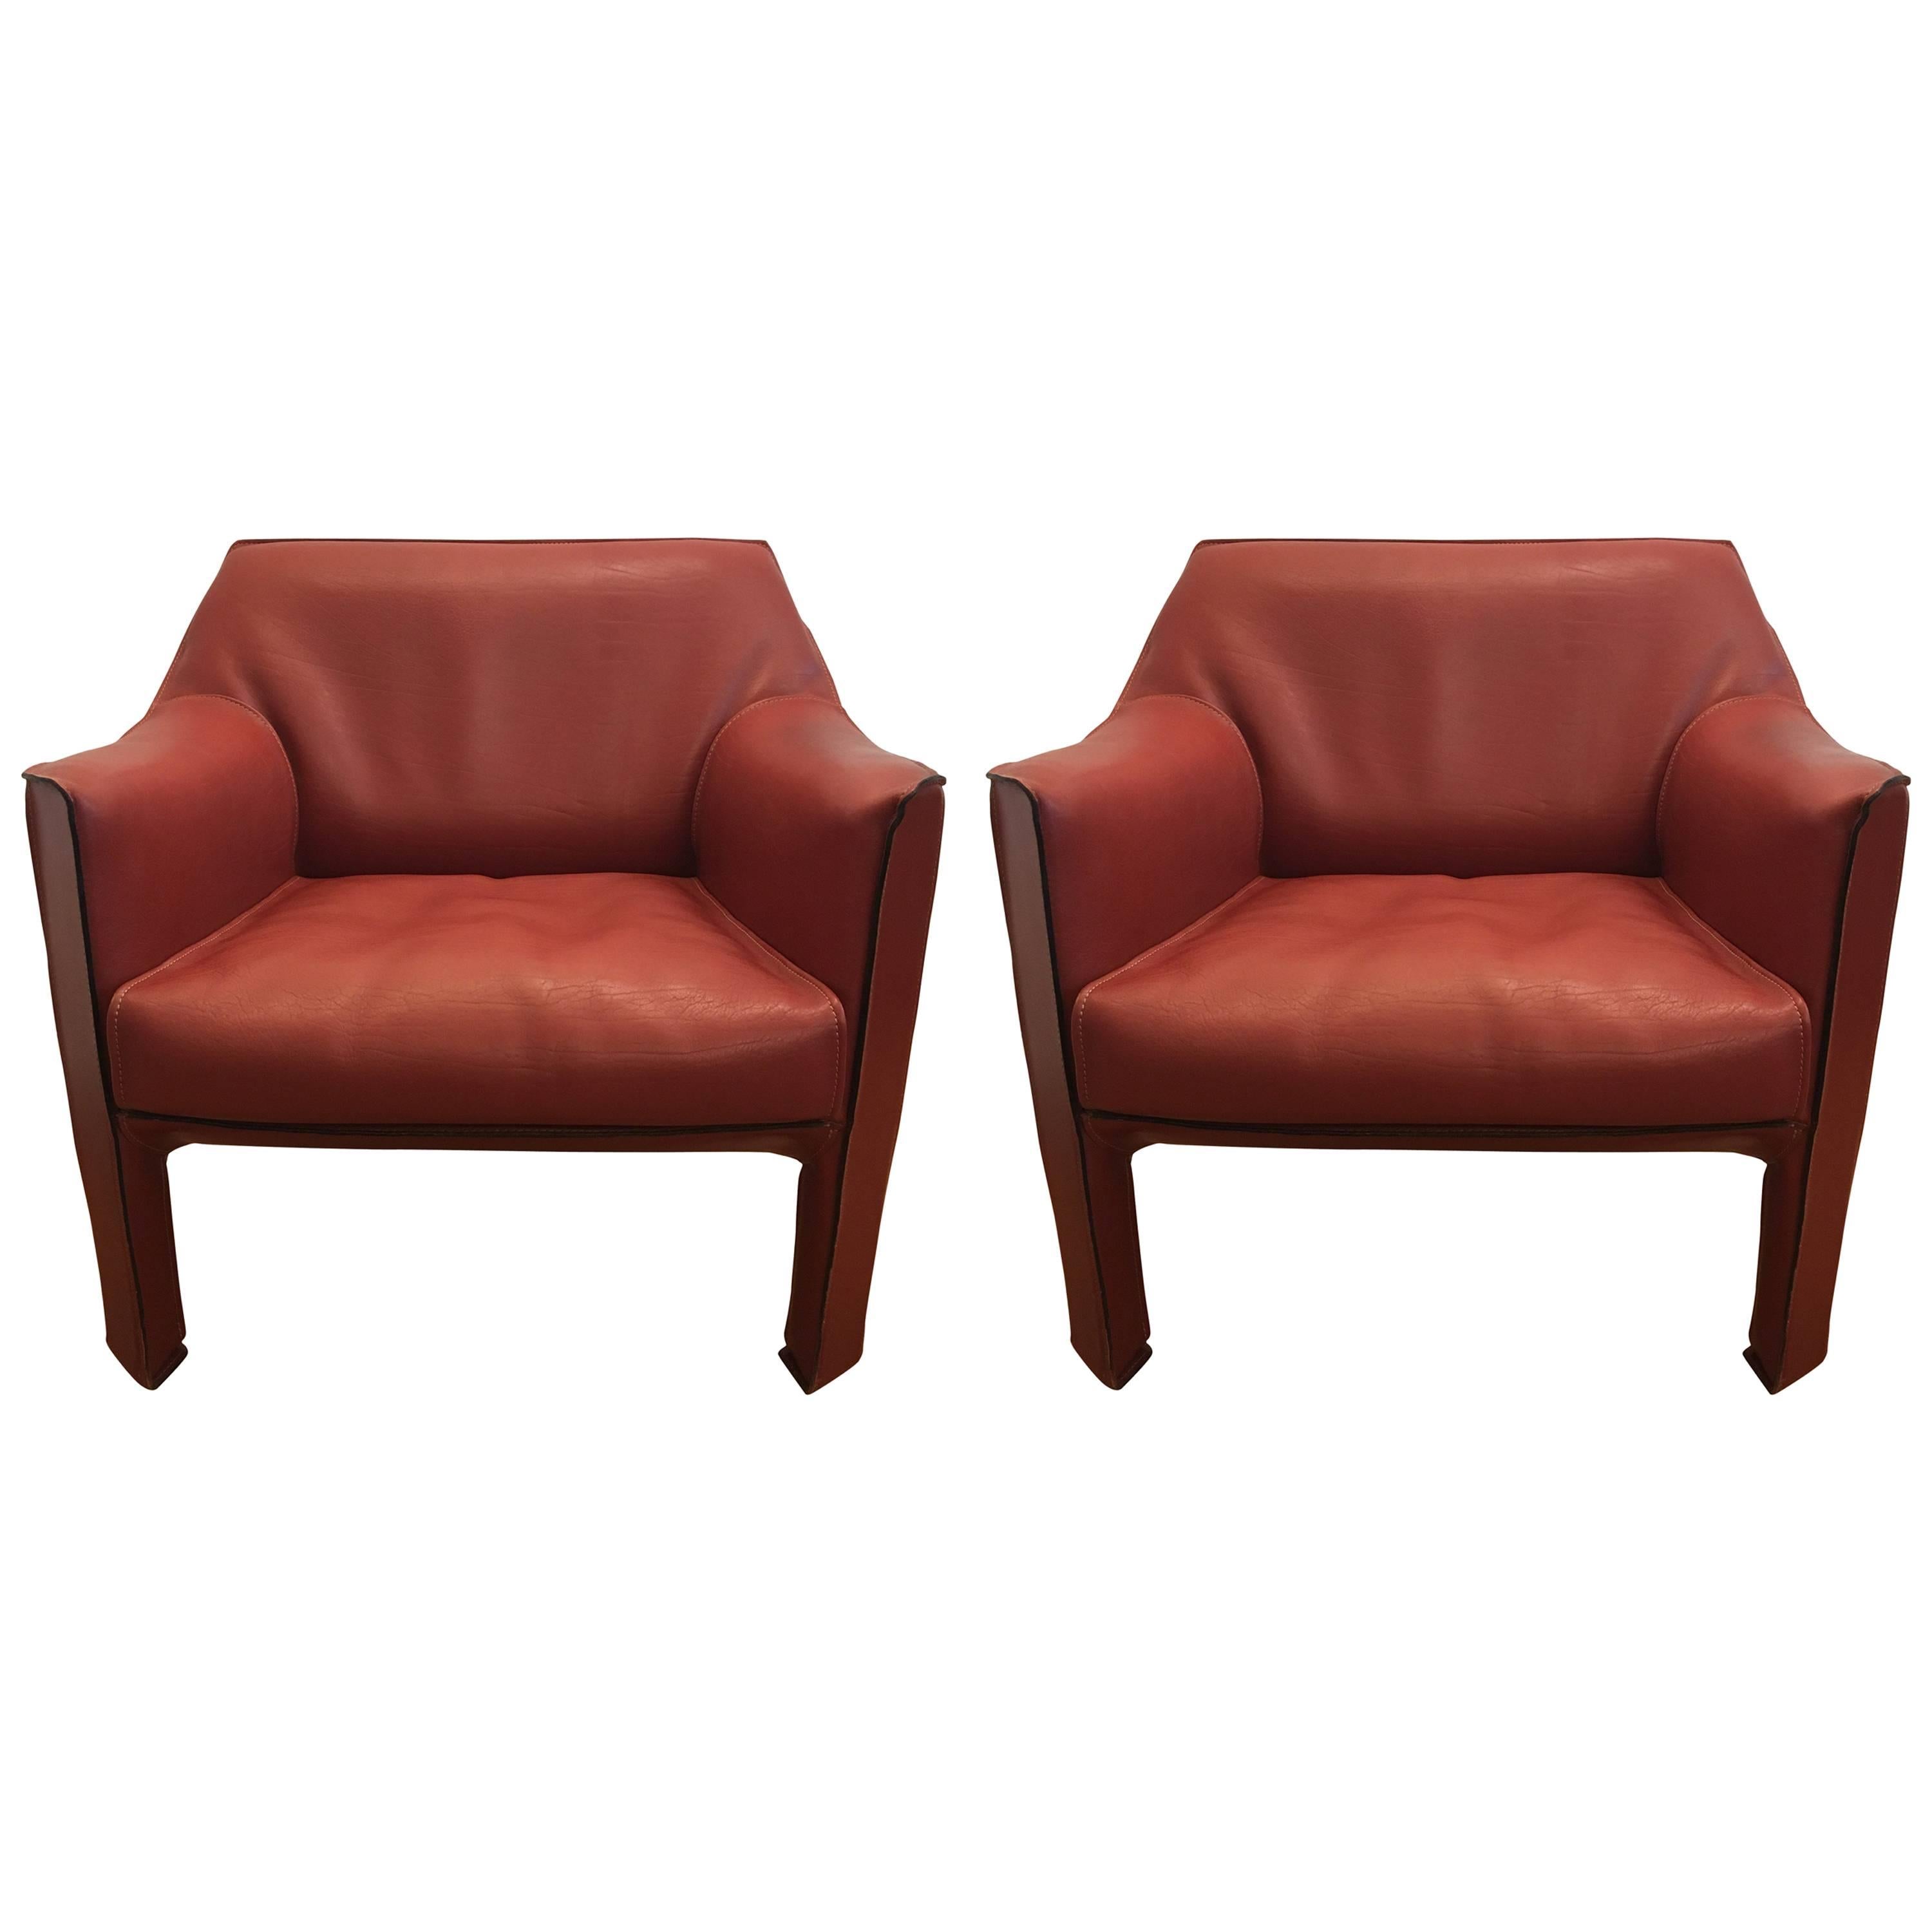 Large Pair of Mario Bellini Cab Lounge Chairs